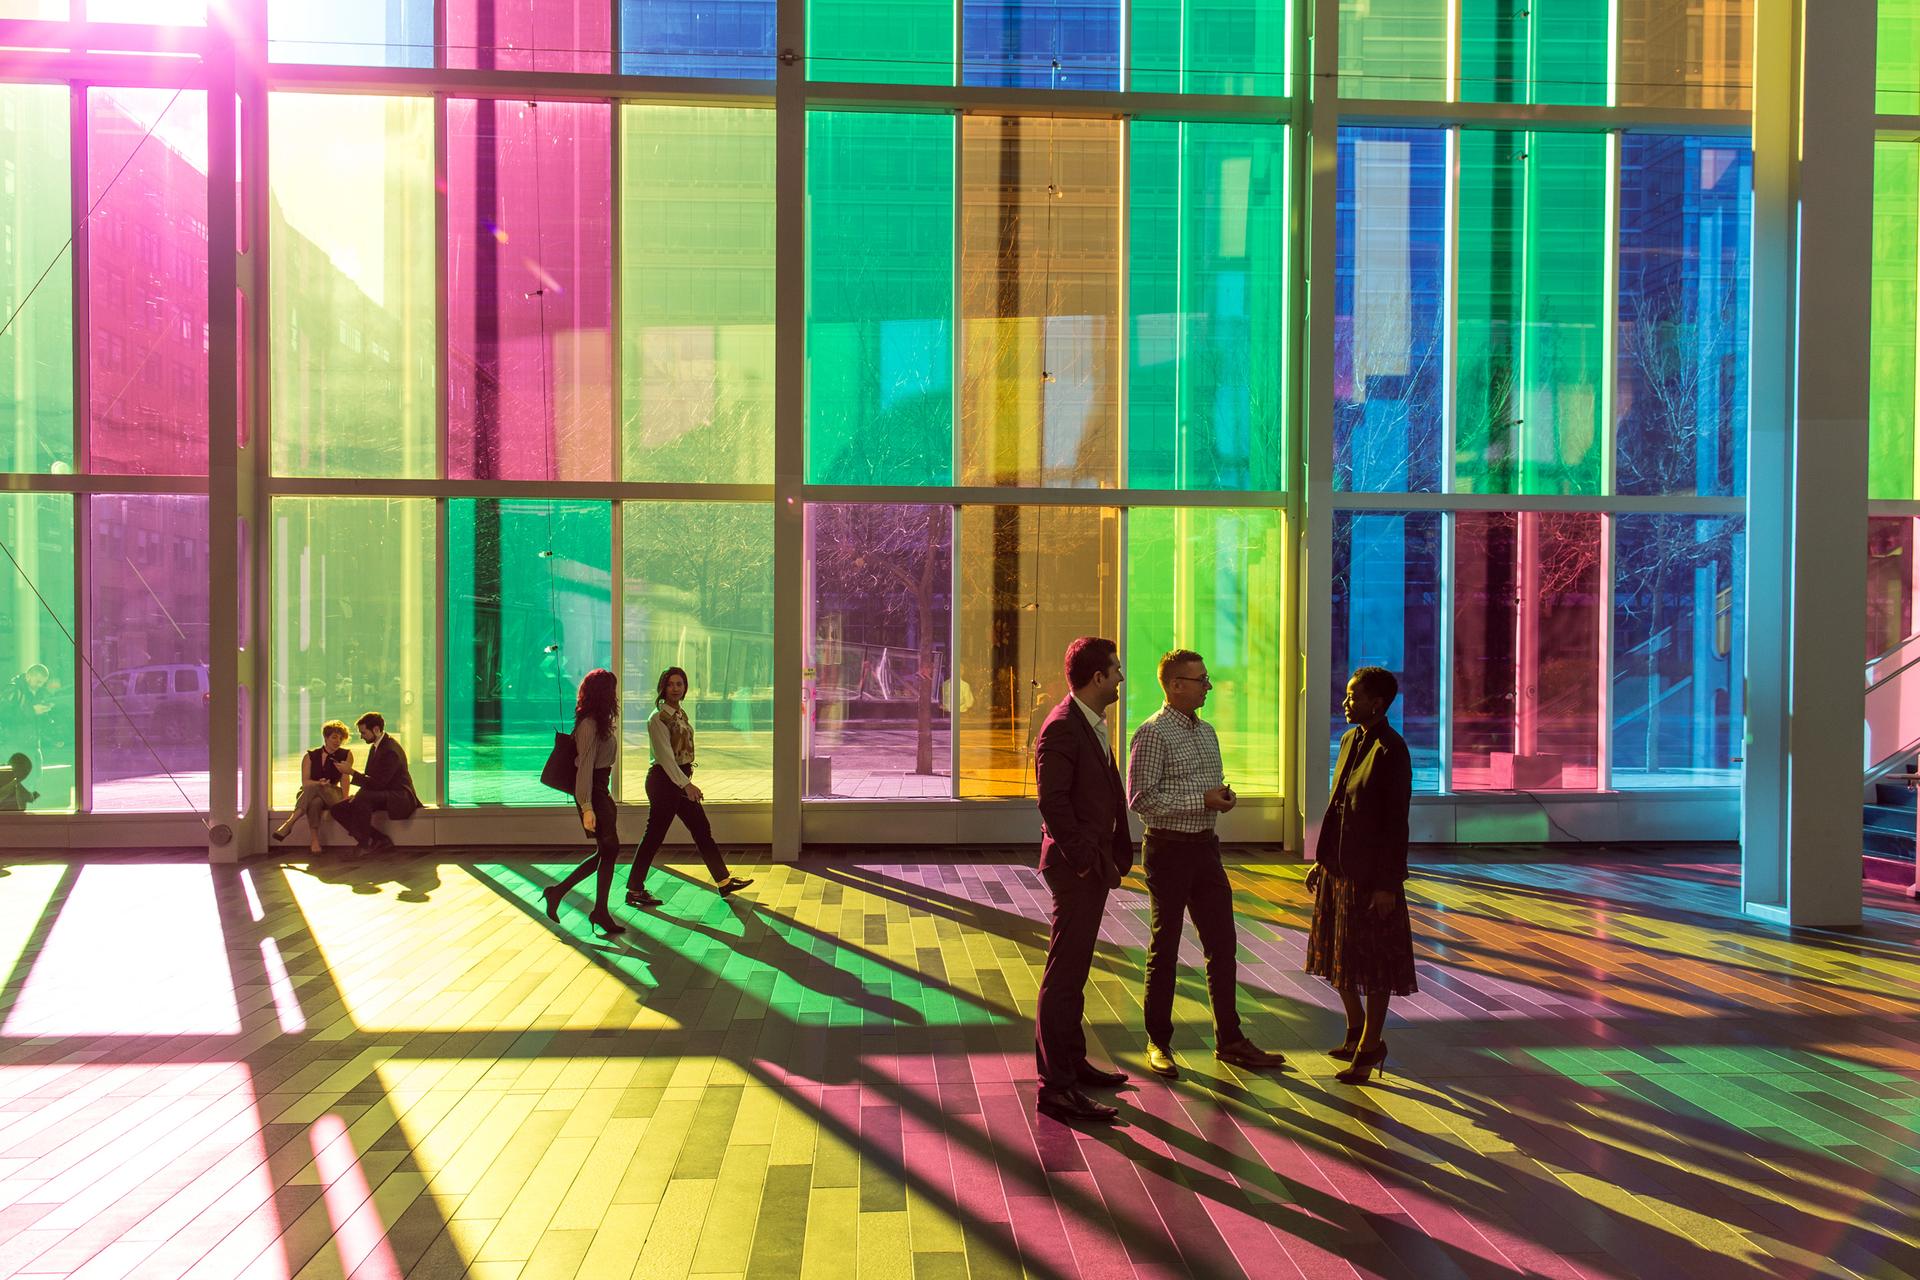 Groups of people in a large hallway of colourful reflective glass windows.